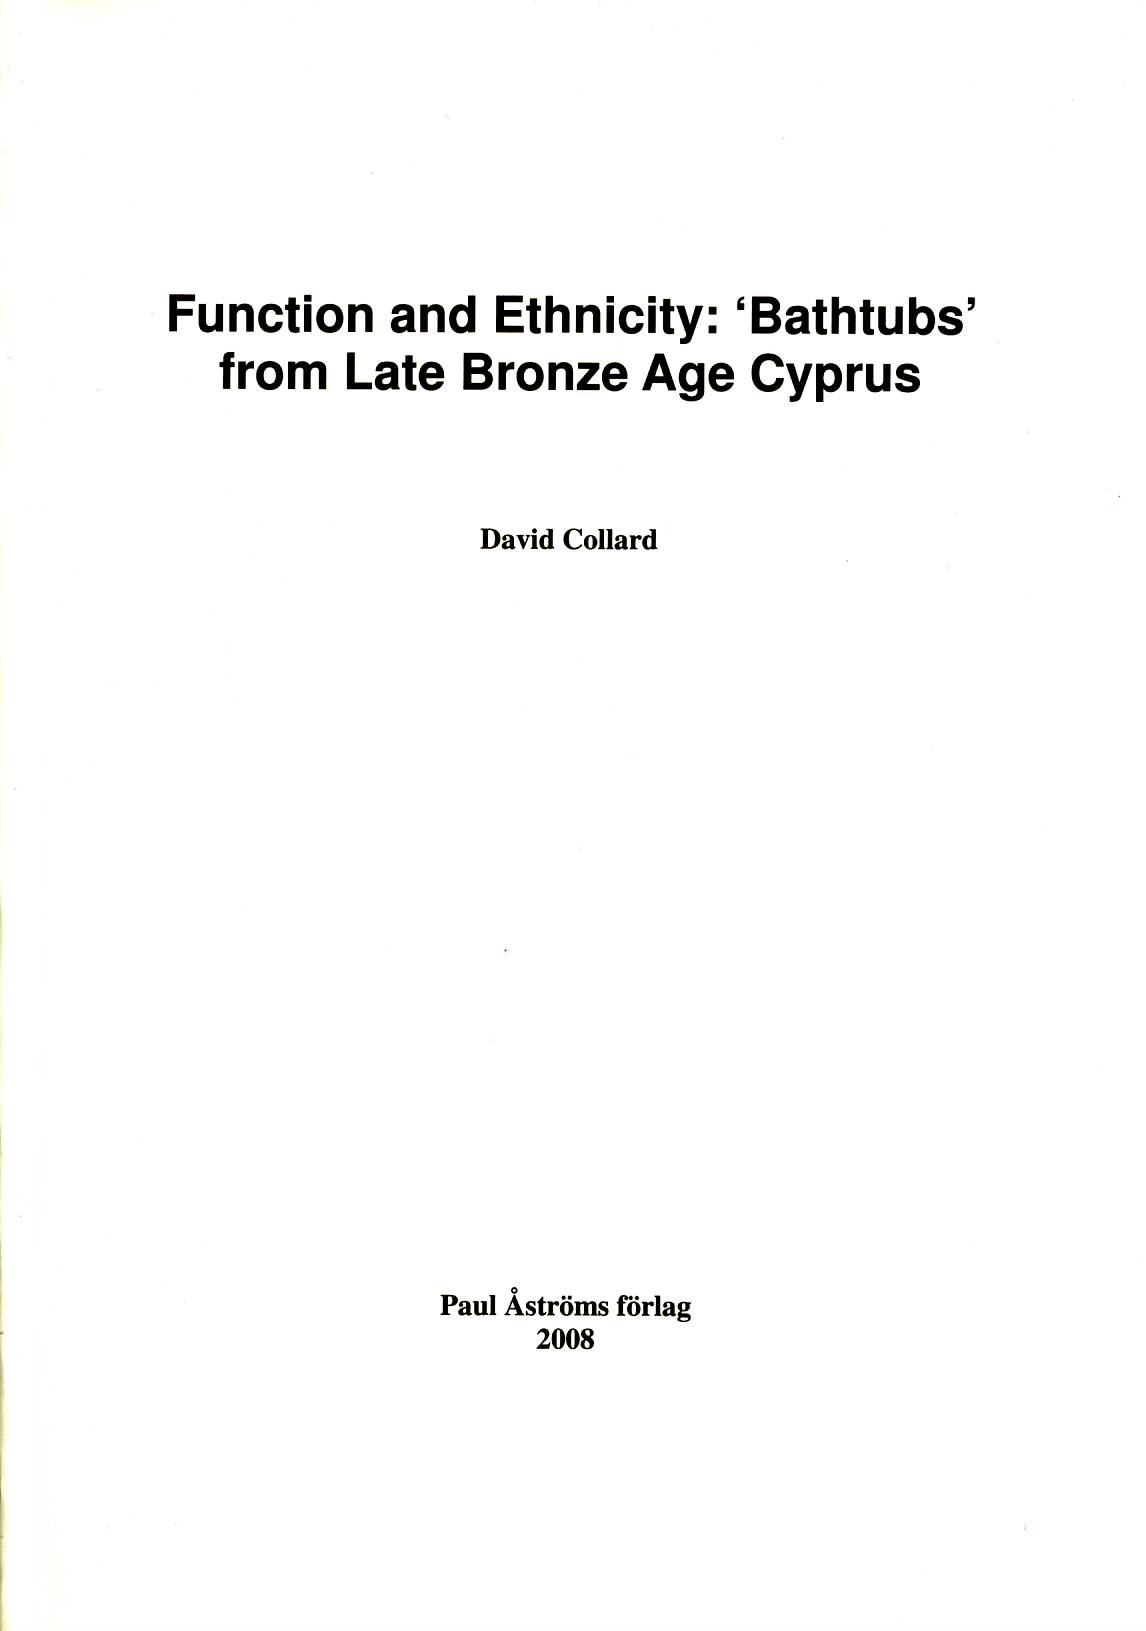 [Function and Ethnicity: ´Bathtubs´ from Late Bronze Age Cyprus.]